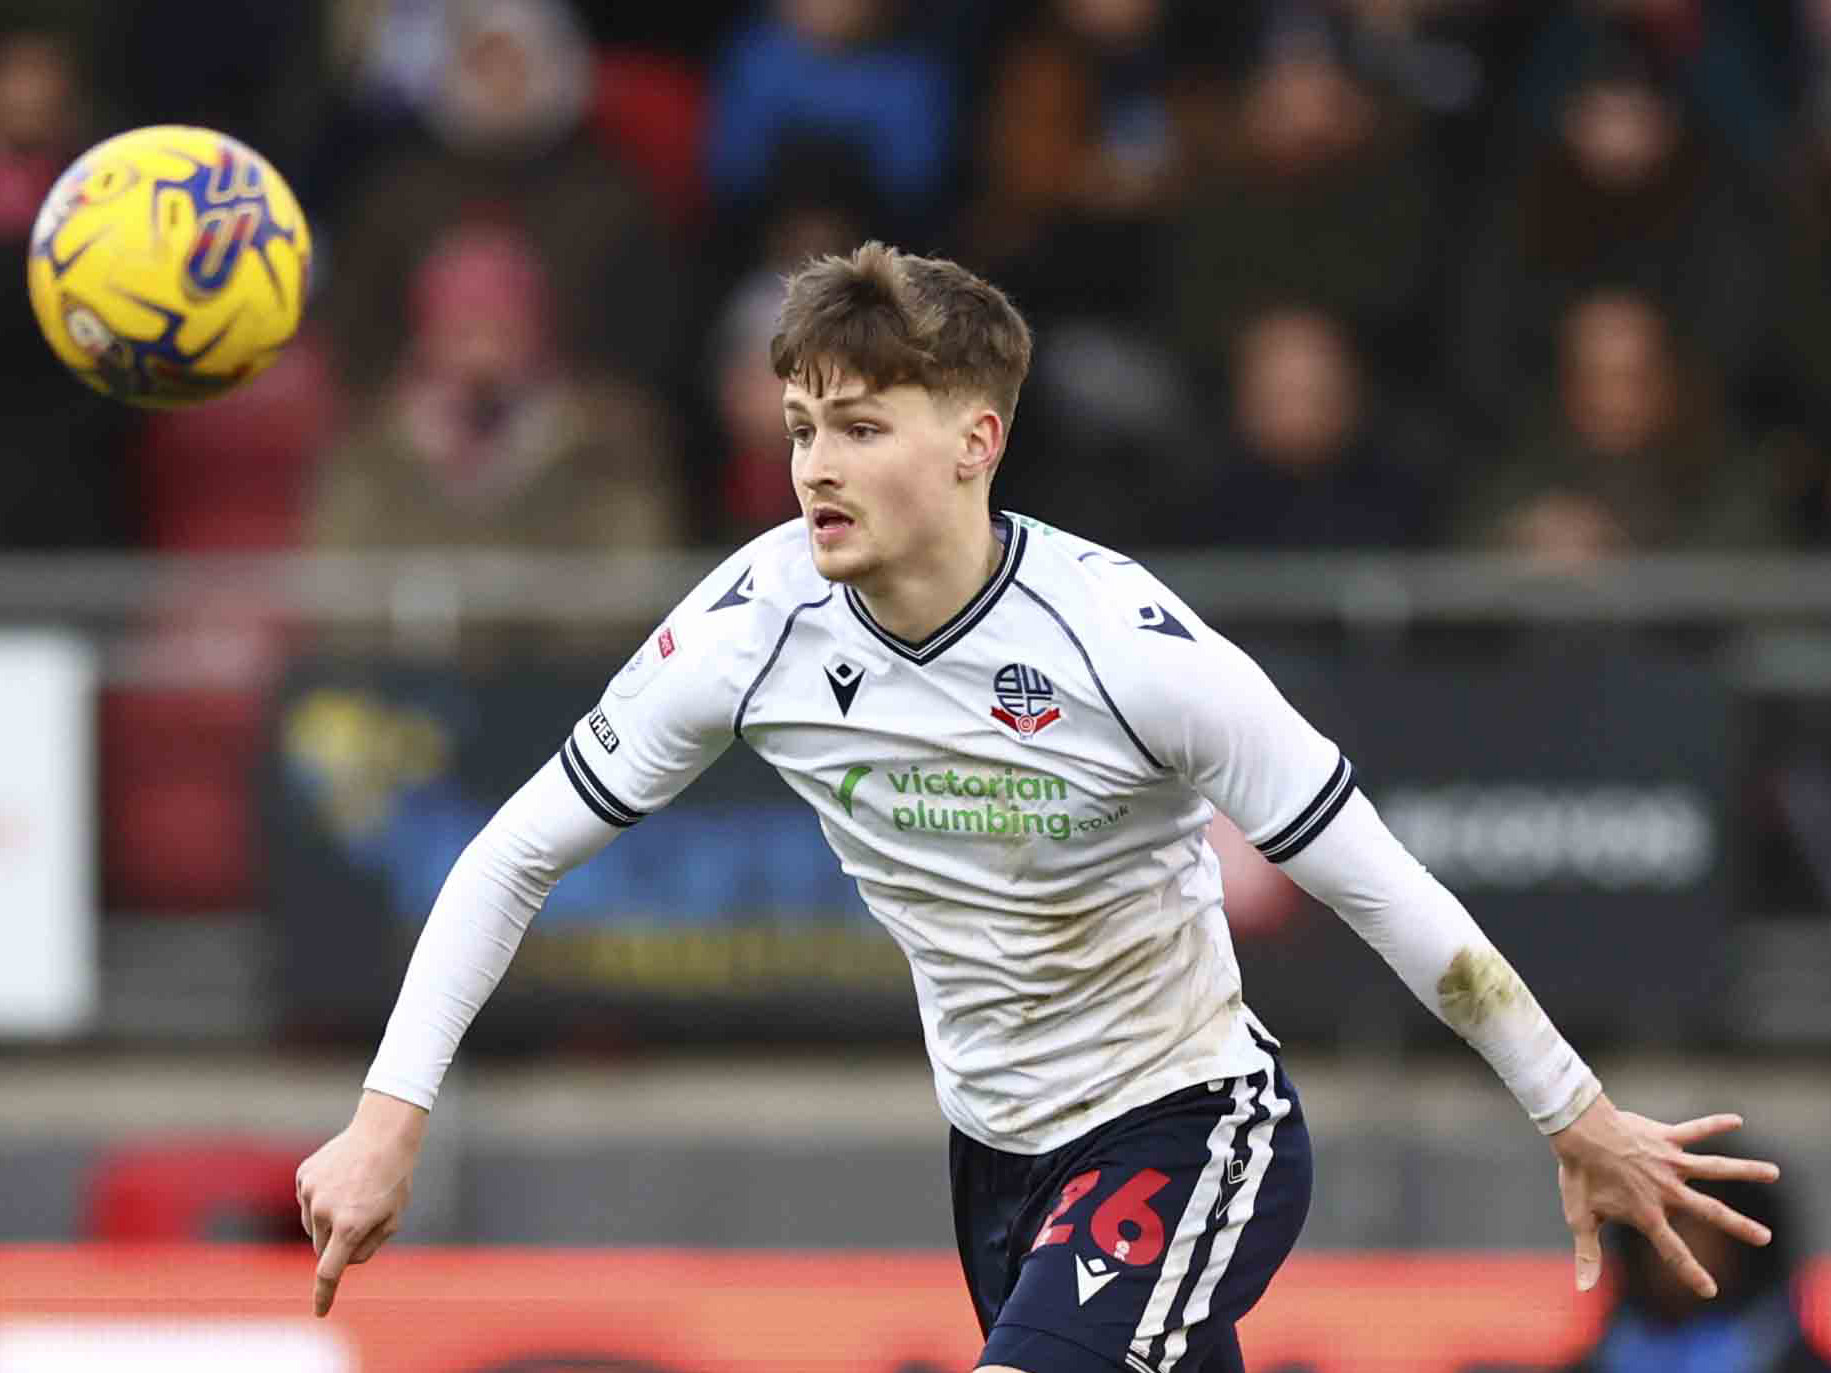 Zac Ashworth chasing the ball while playing for Bolton Wanderers 